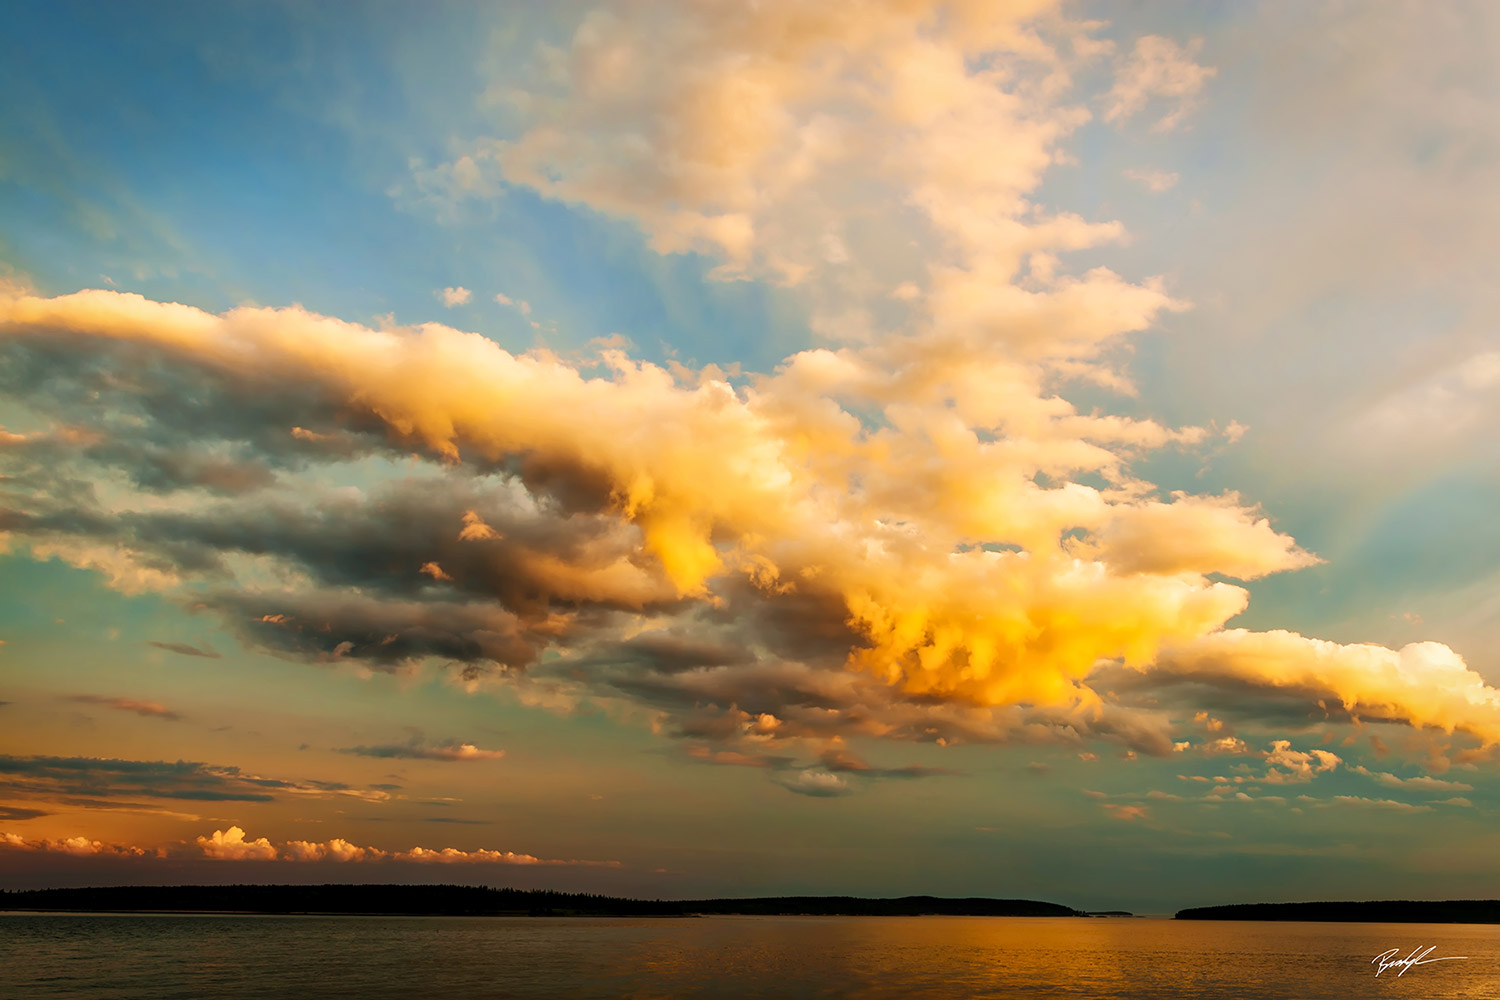 Cloud Bank and Sunset Acadia National Park Maine